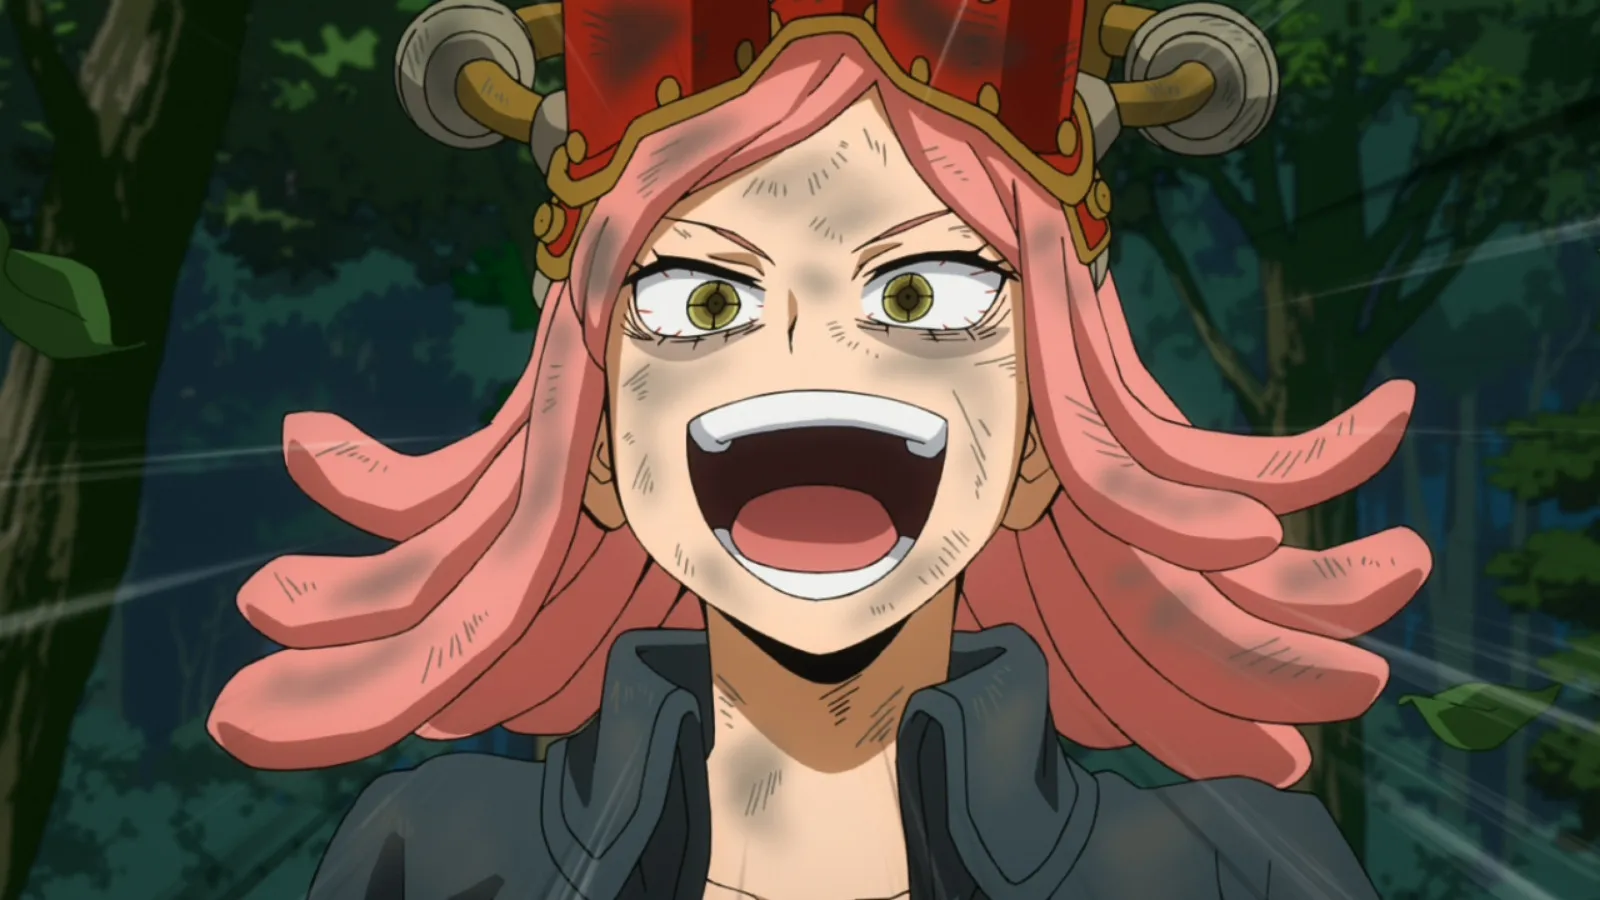 Mei Hatsume laughing with a dirty face in 'My Hero Academia'.